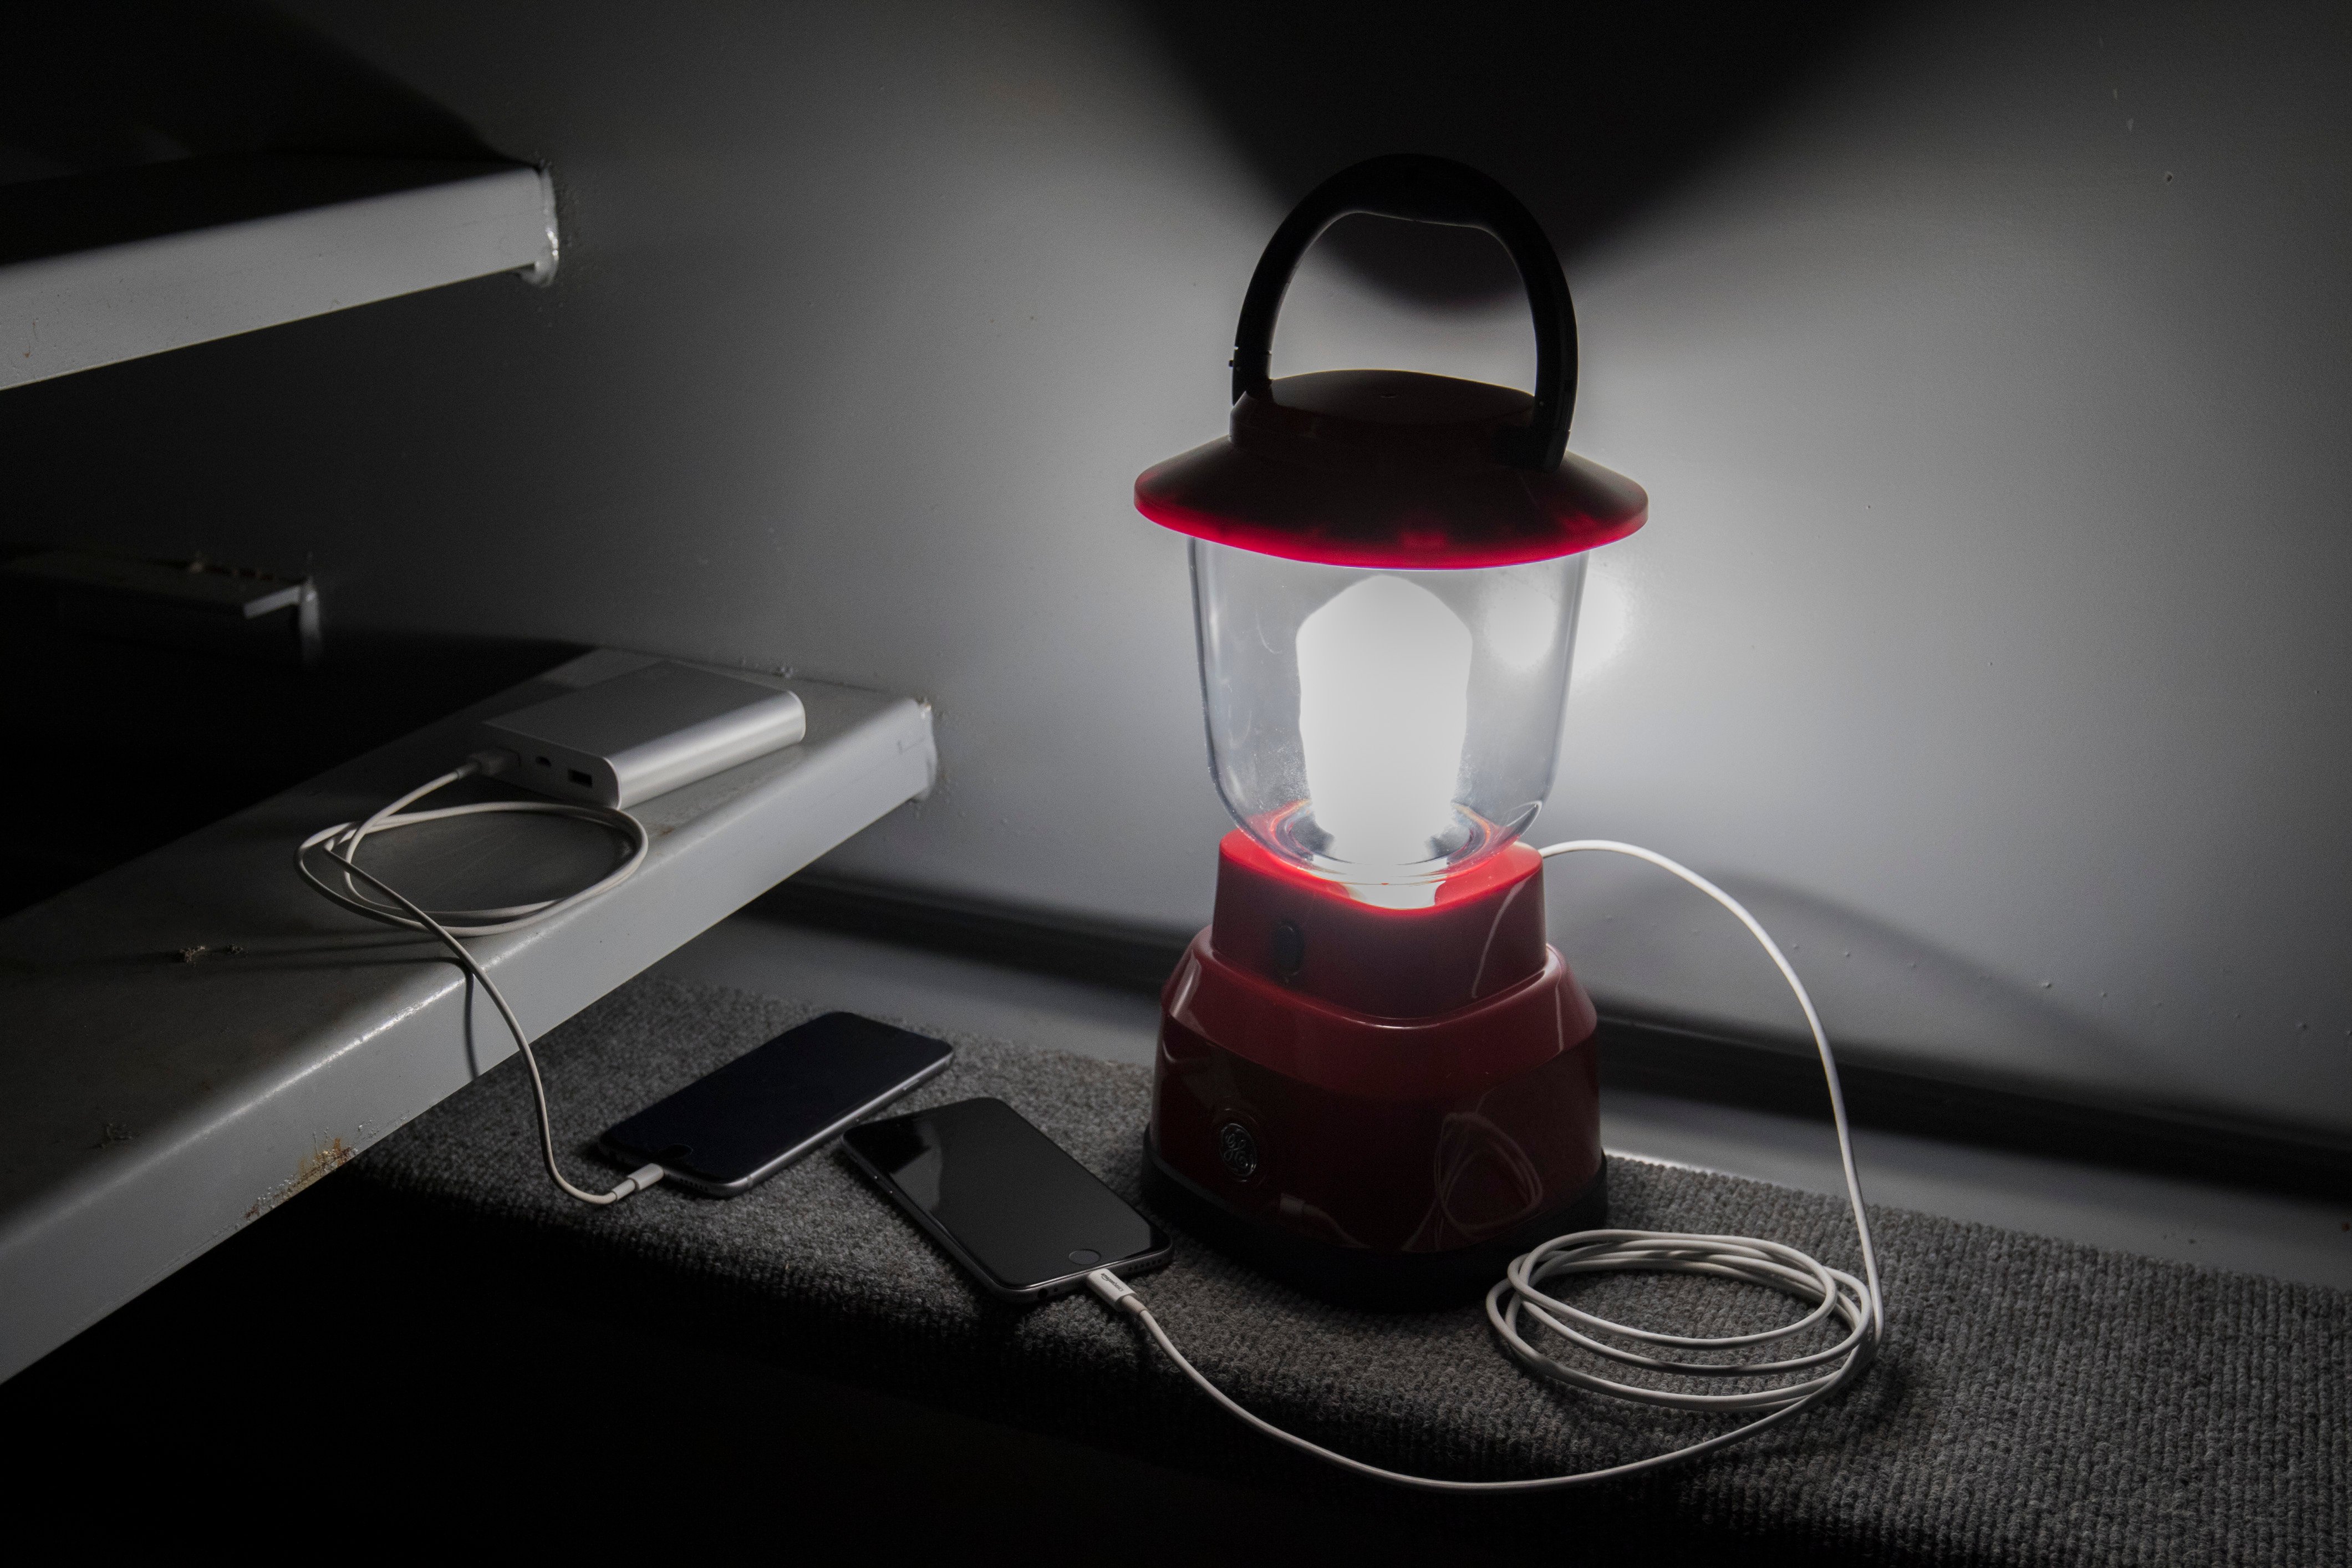 Pick up an EcoSurvivor LED lantern that does double duty with a built-in USB charging port.